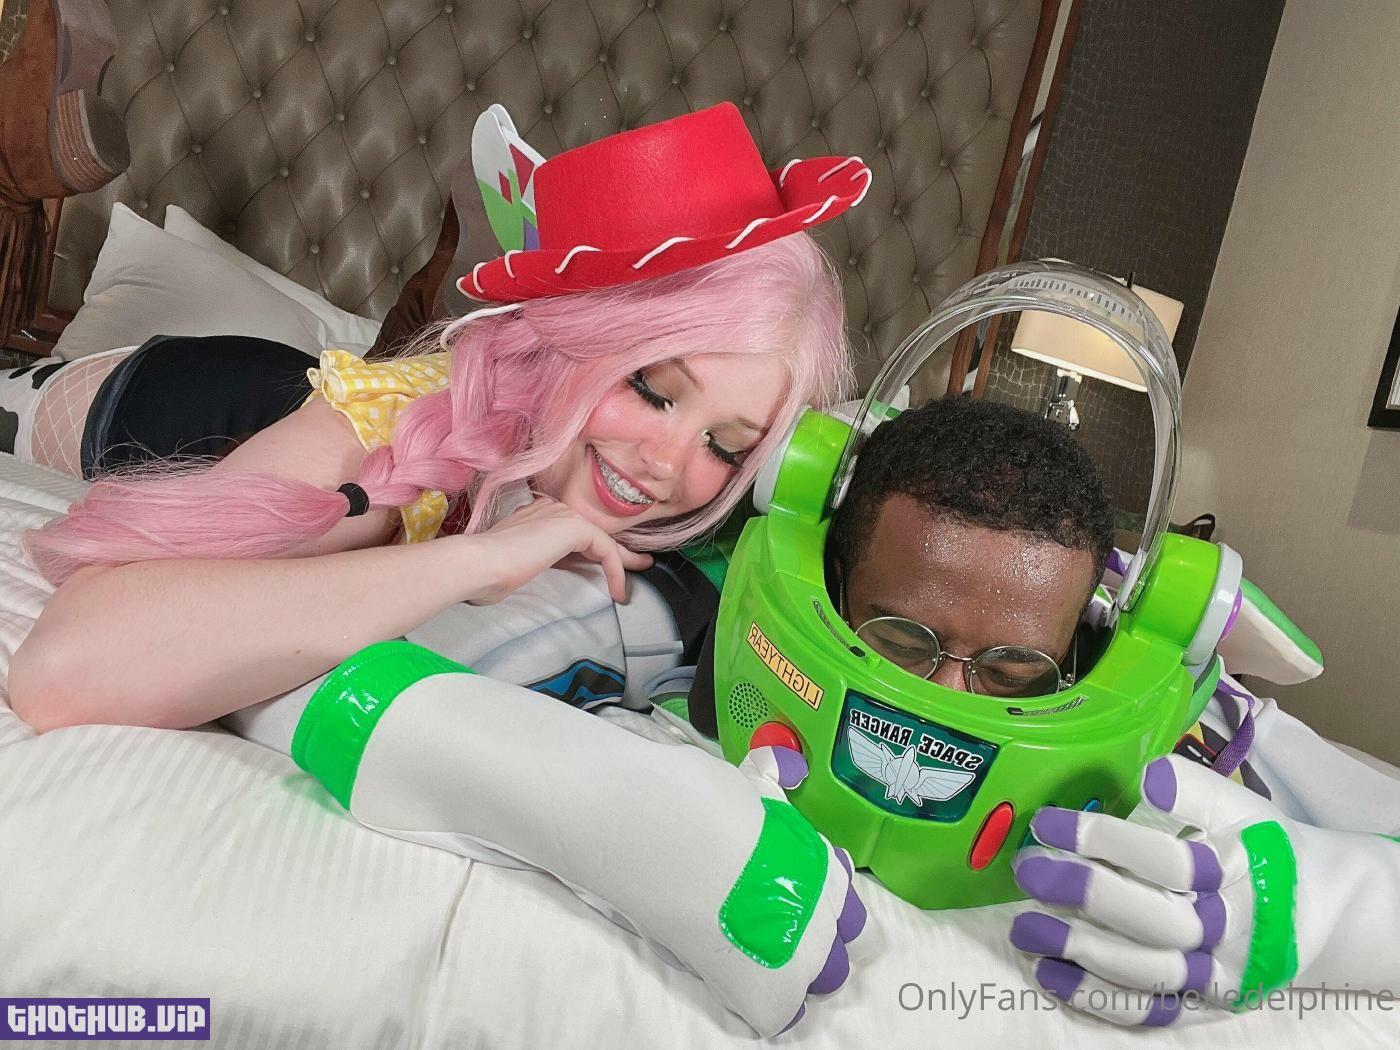 belle_delphine_twomad_buzz_lightyear_onlyfans_set_leaked-QWGCGR.jpg